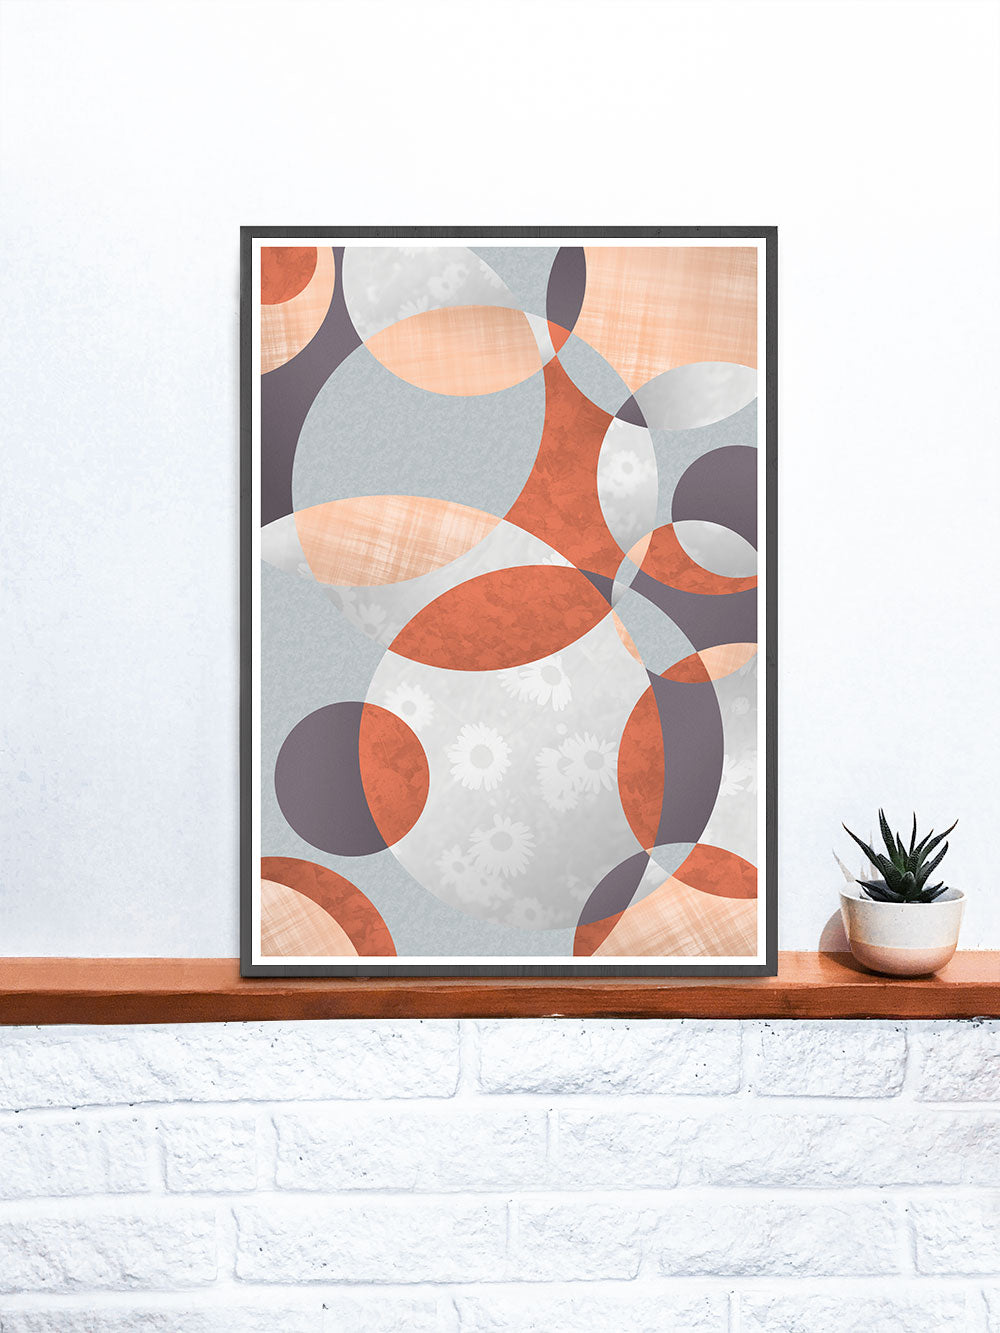 Flower Spiral Abstract Art with Circles on a Shelf